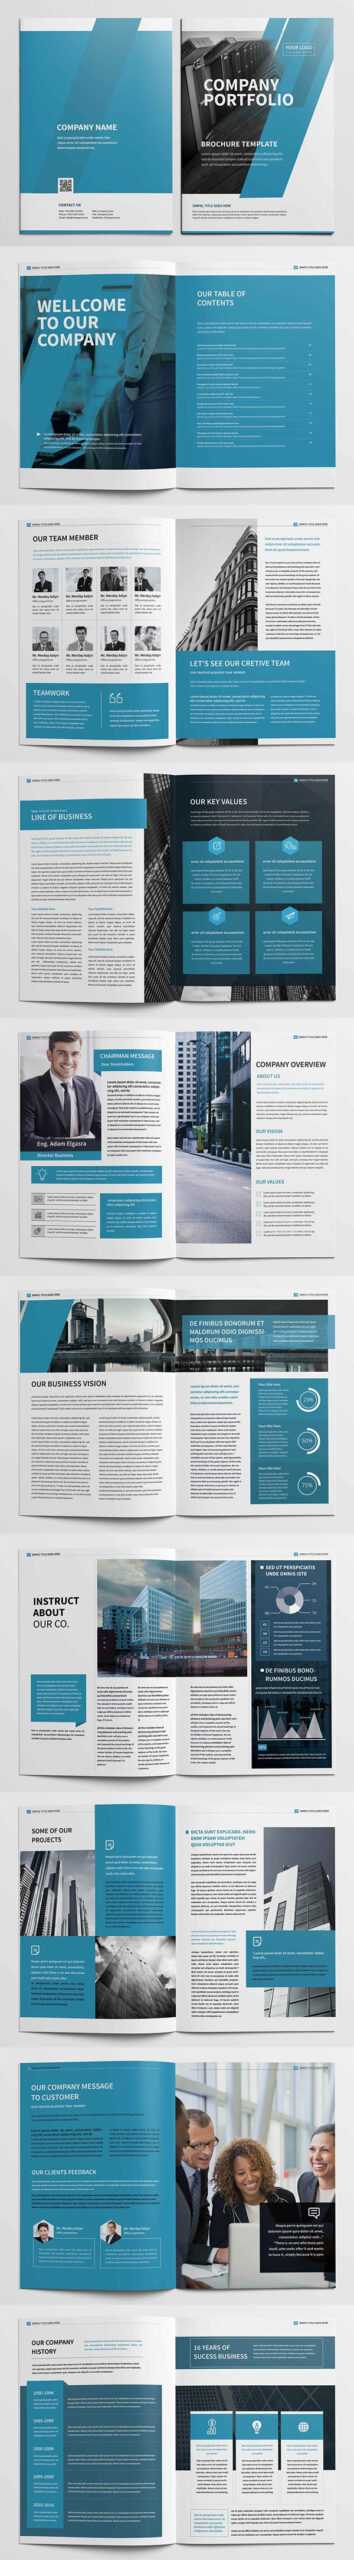 Brochure Templates And Catalog Design | Design | Graphic Intended For Engineering Brochure Templates